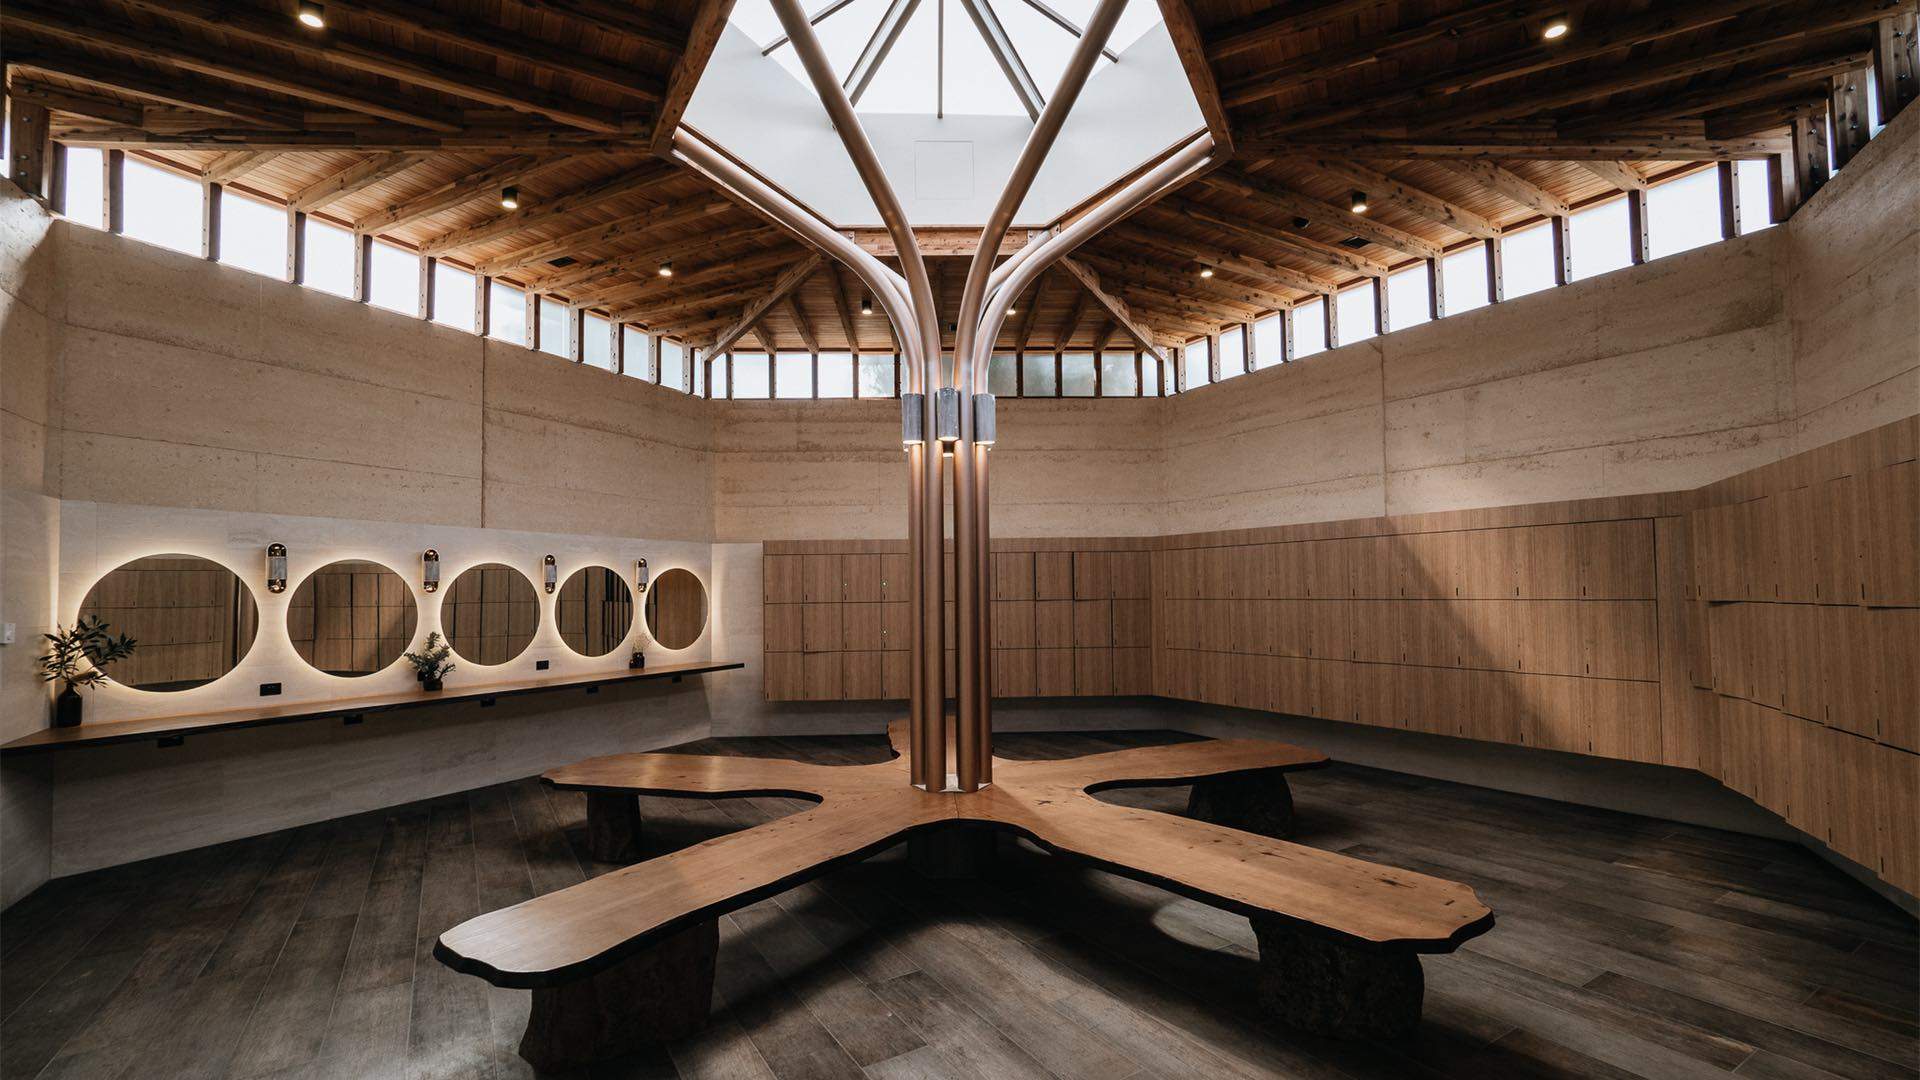 Victoria's Peninsula Hot Springs Retreat Has Undergone a Luxurious $13 Million Expansion